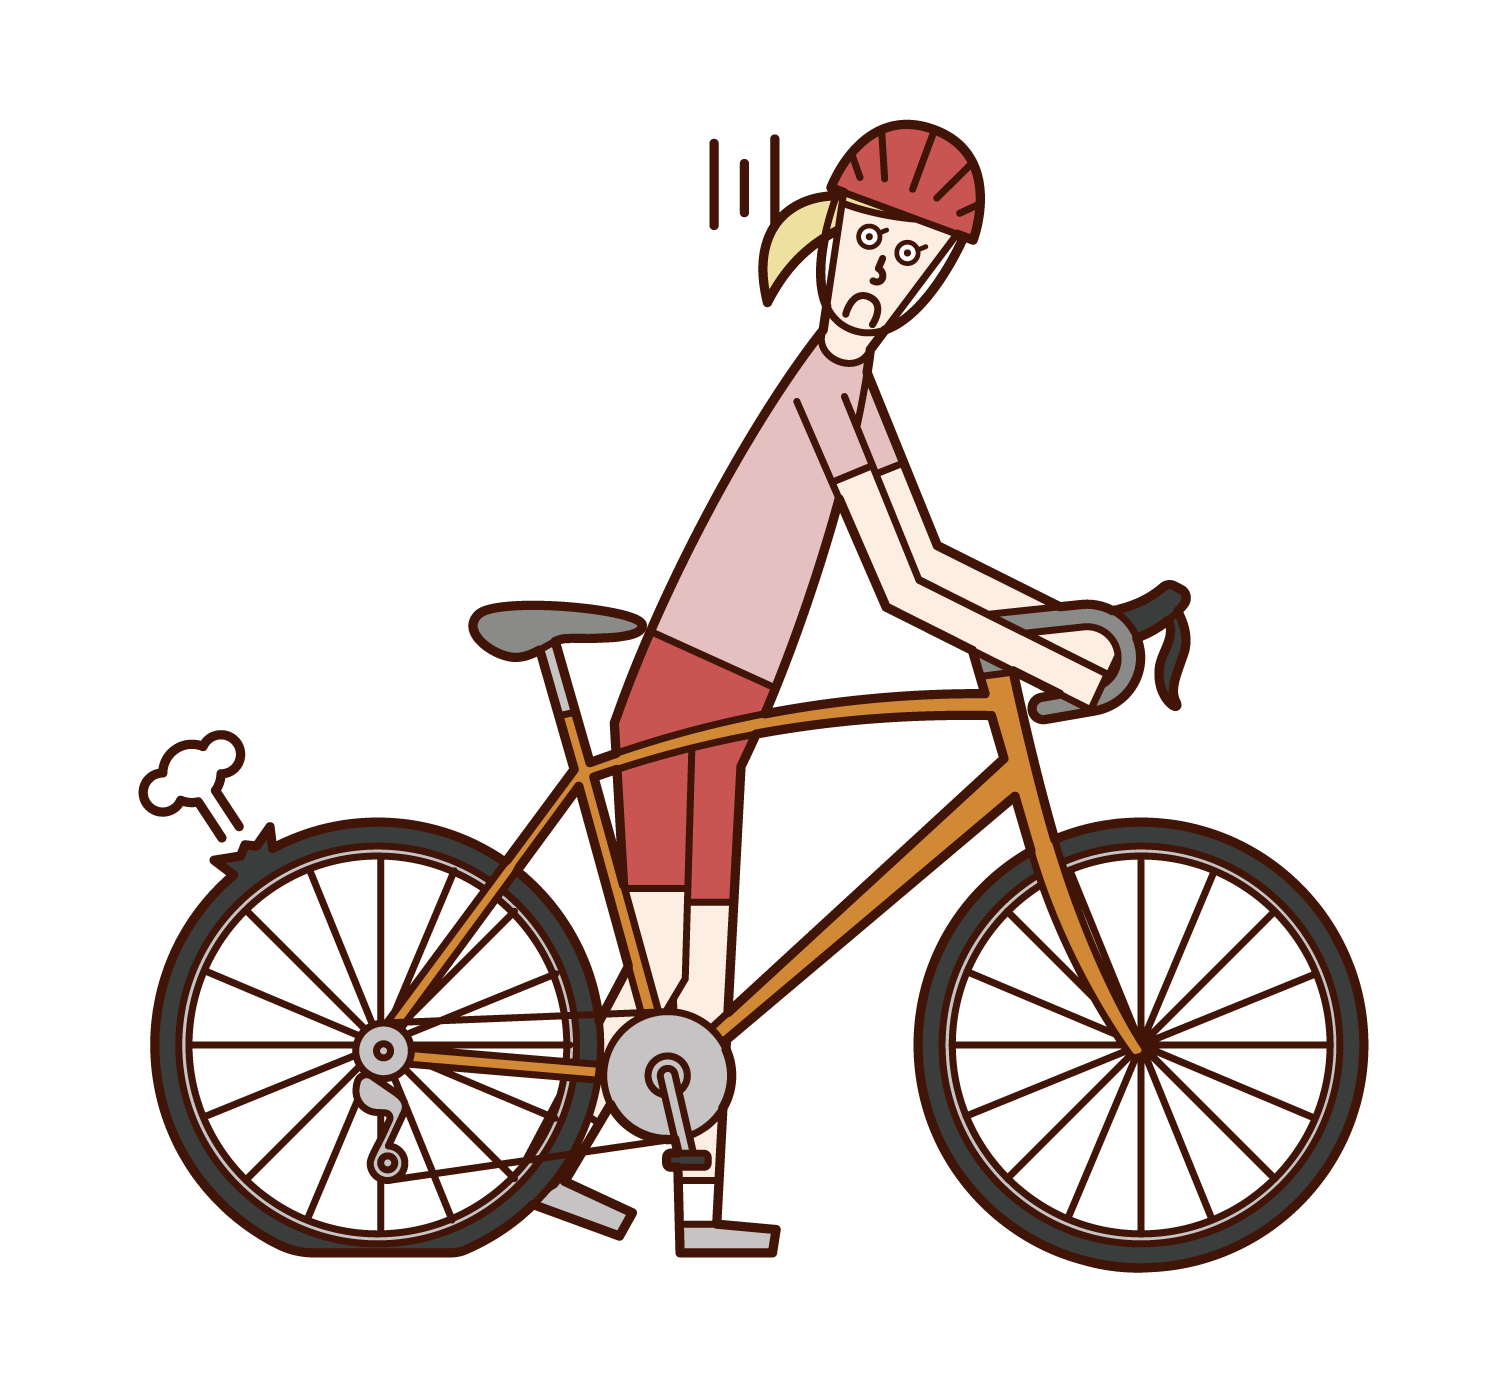 Illustration of a woman pushing a flat-hit bicycle